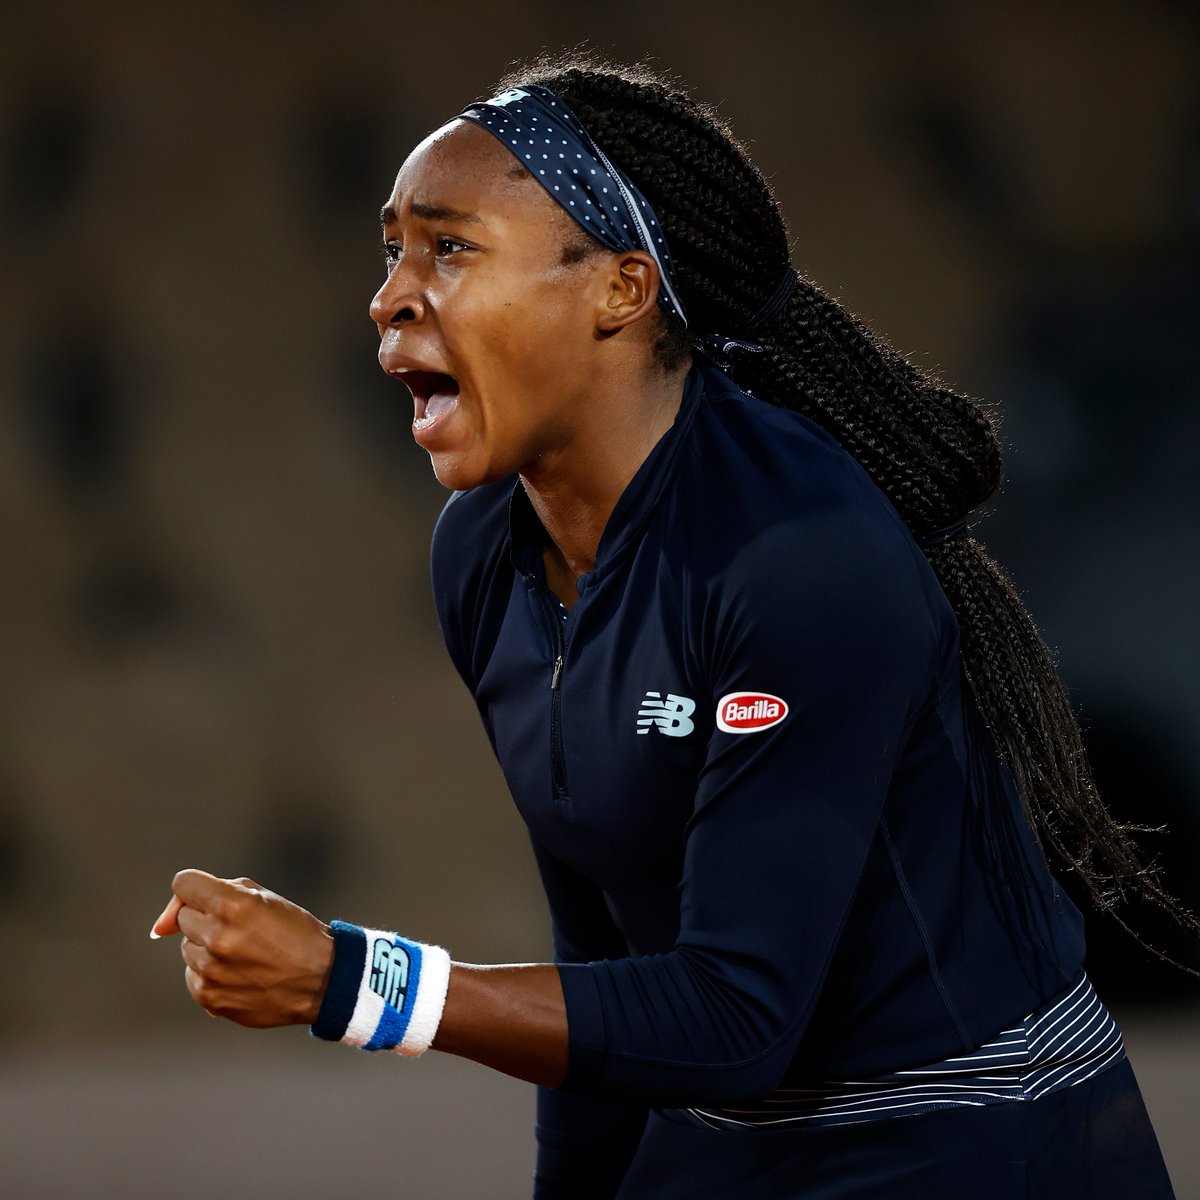  "I'm fighting for the future for my brothers, for my future kid and for my future grandchildren." @CocoGauff took the sporting world by storm in 2019 earning her an Laureus nomination but more than that she uses her platform to strive for change...A reminder she's just 16!